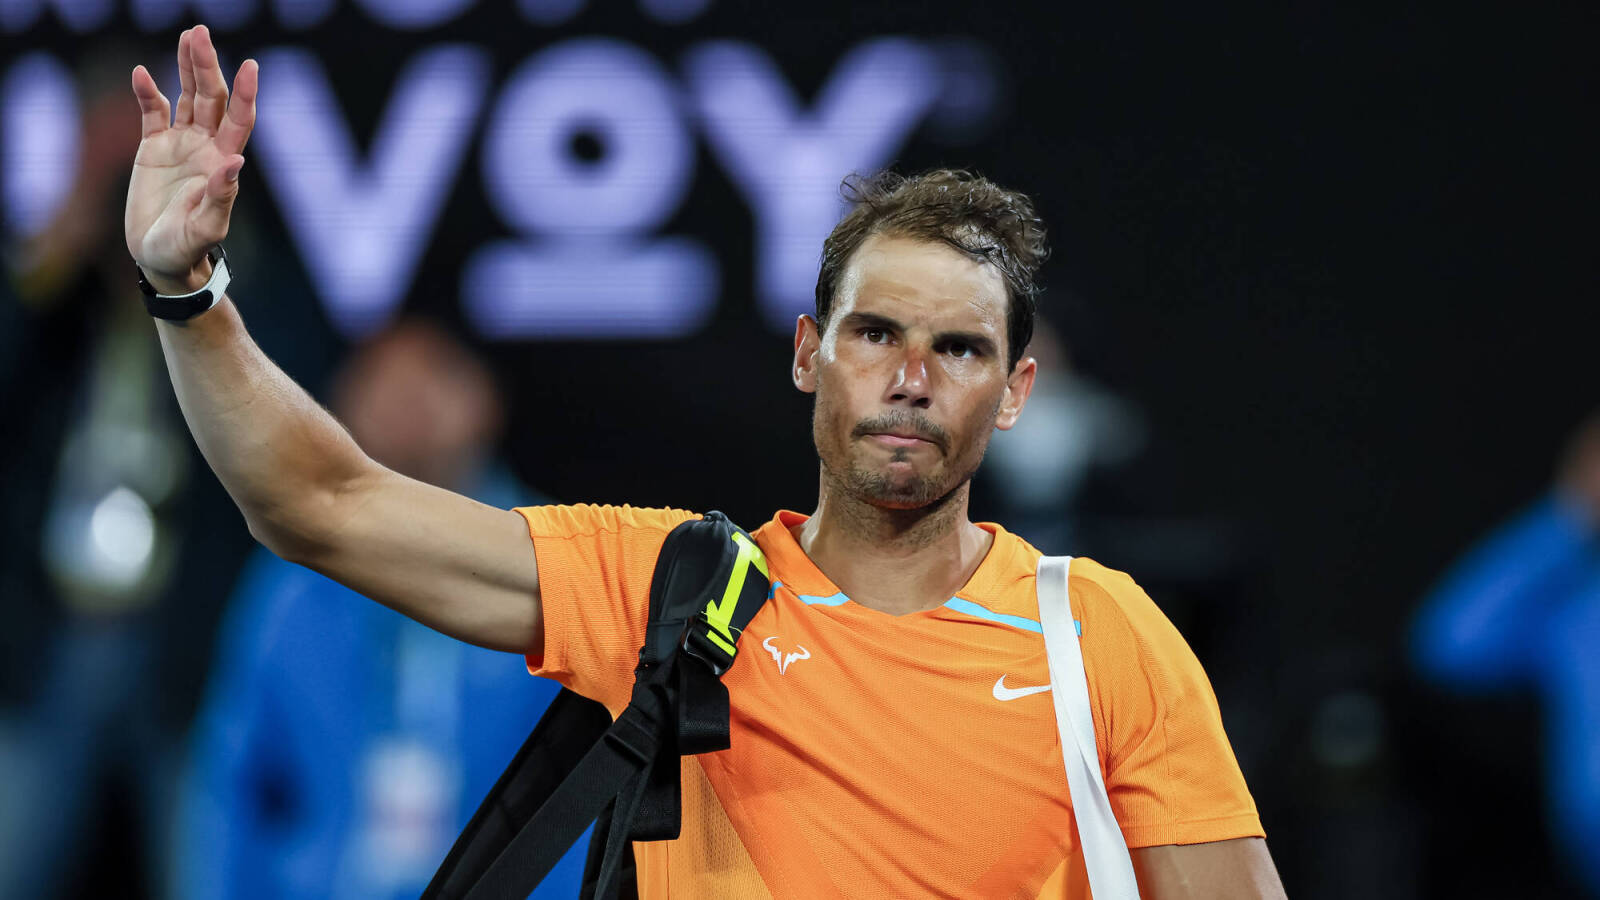 French Open hopes still alive for Rafael Nadal as he plans to fly to Paris soon